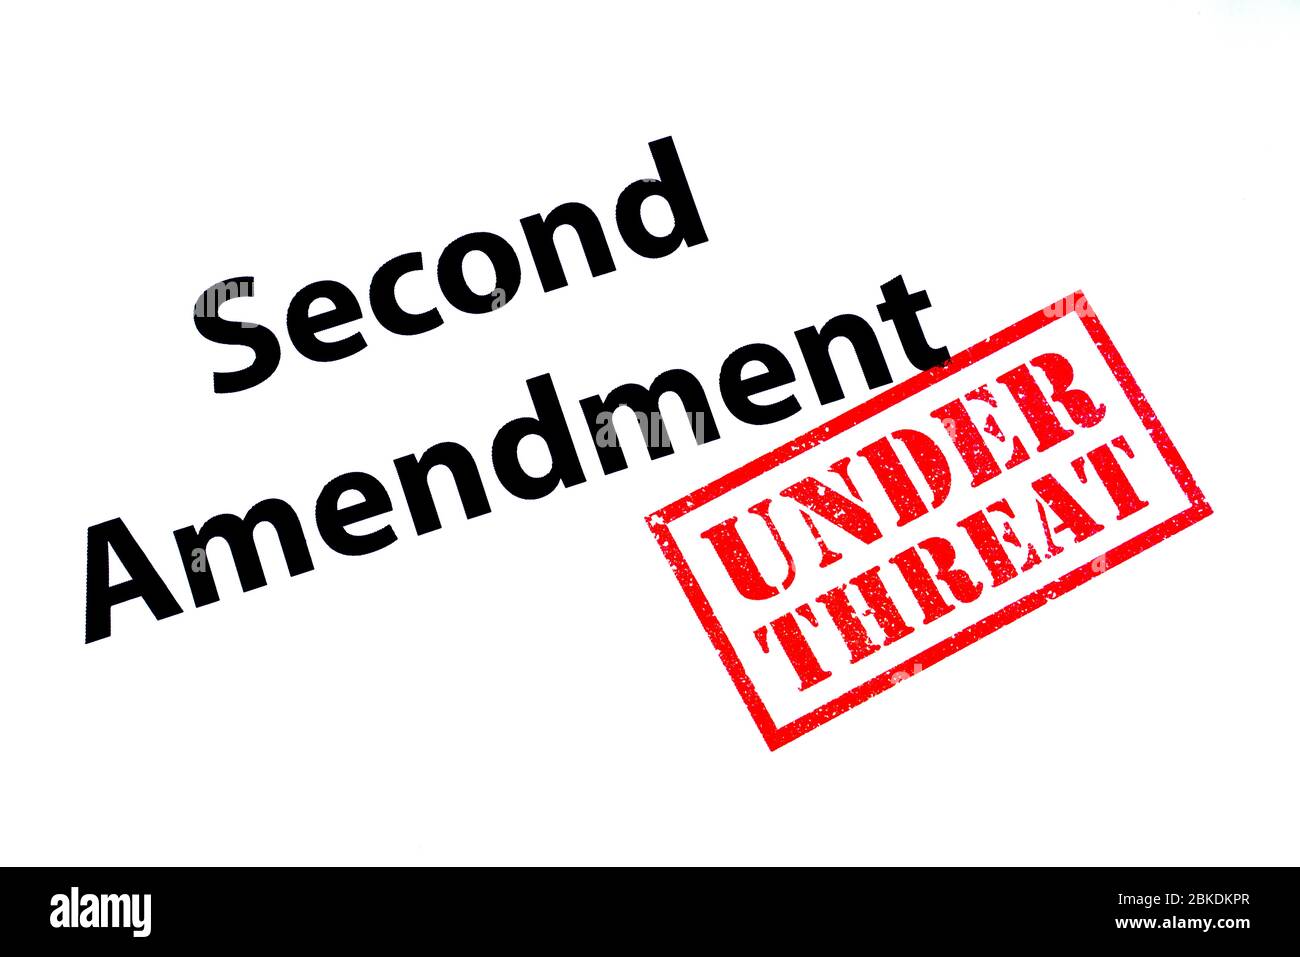 Second Amendment heading with a red UNDER THREAT rubber stamp. Stock Photo